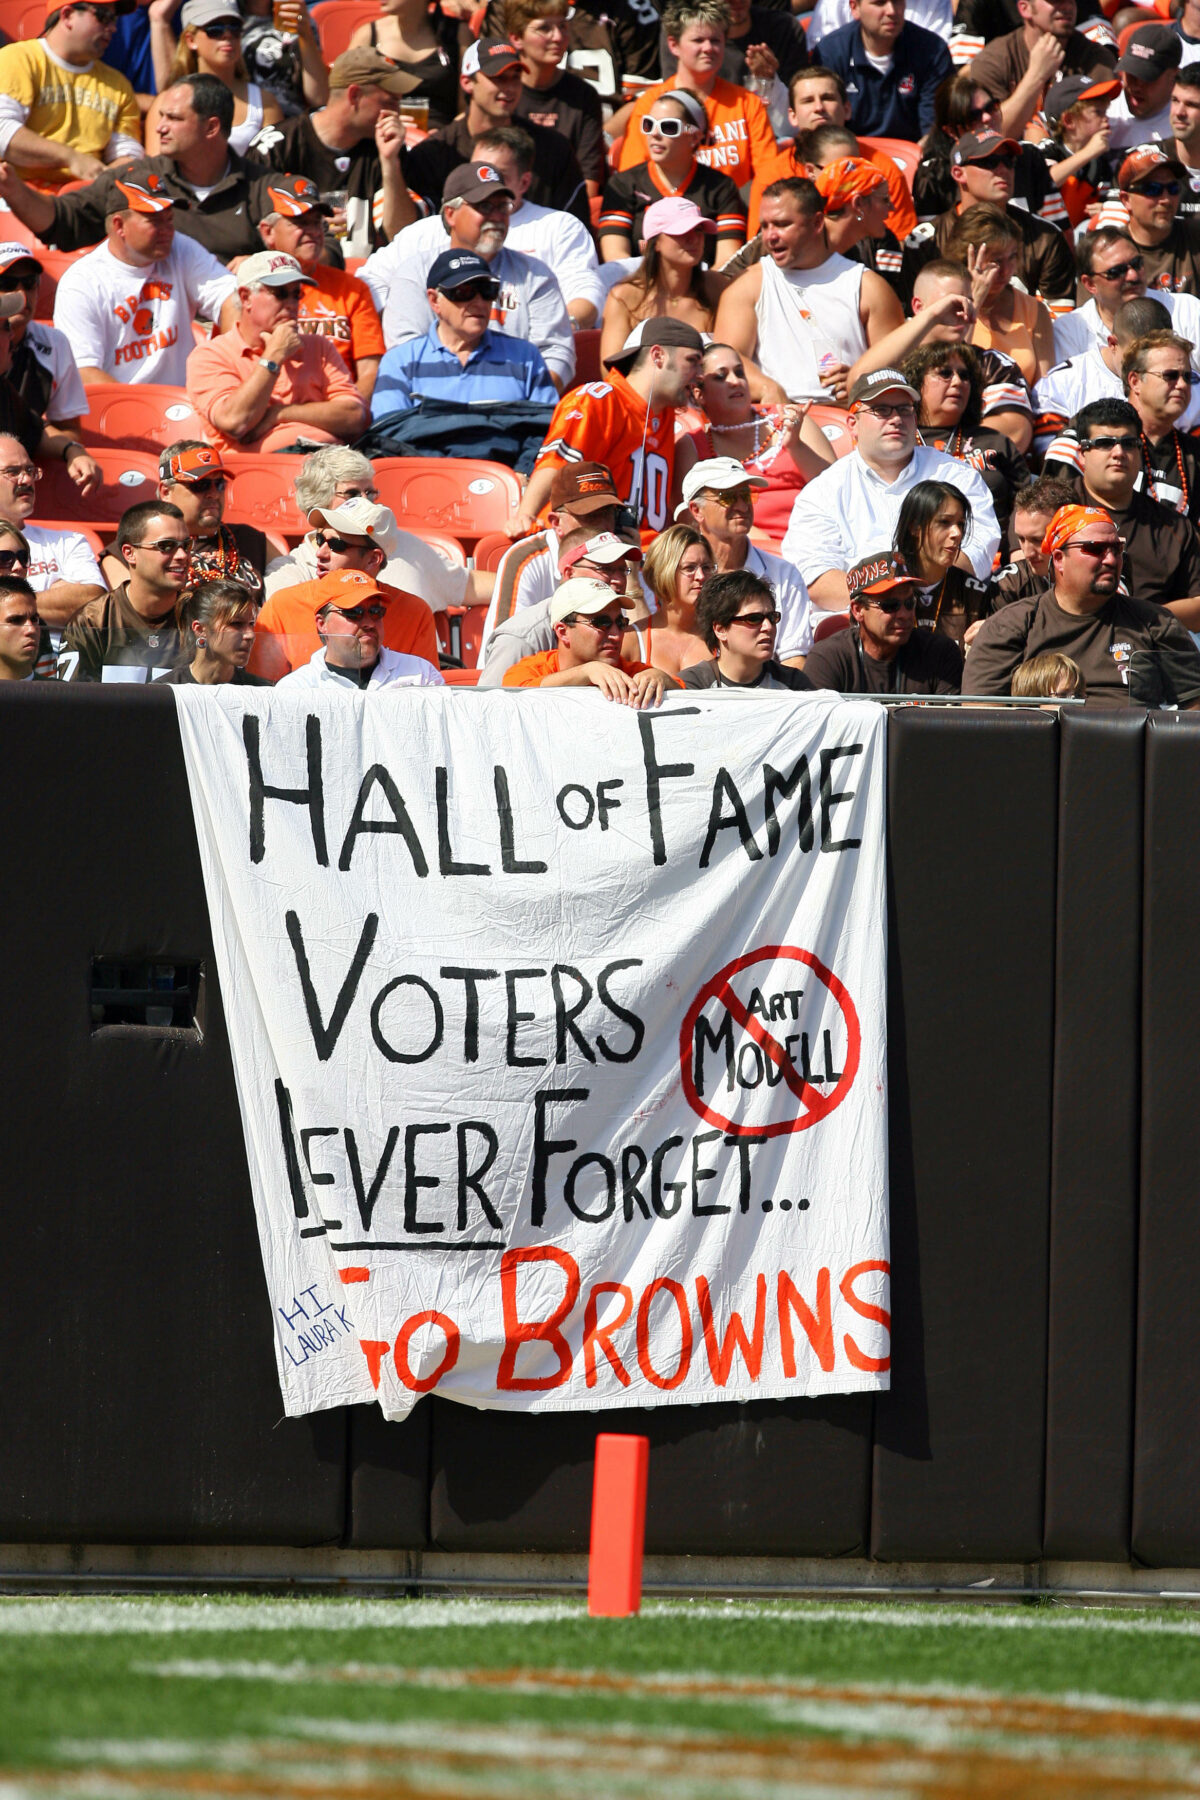 Former Browns owner Art Modell once again a semifinalist for Pro Football Hall of Fame